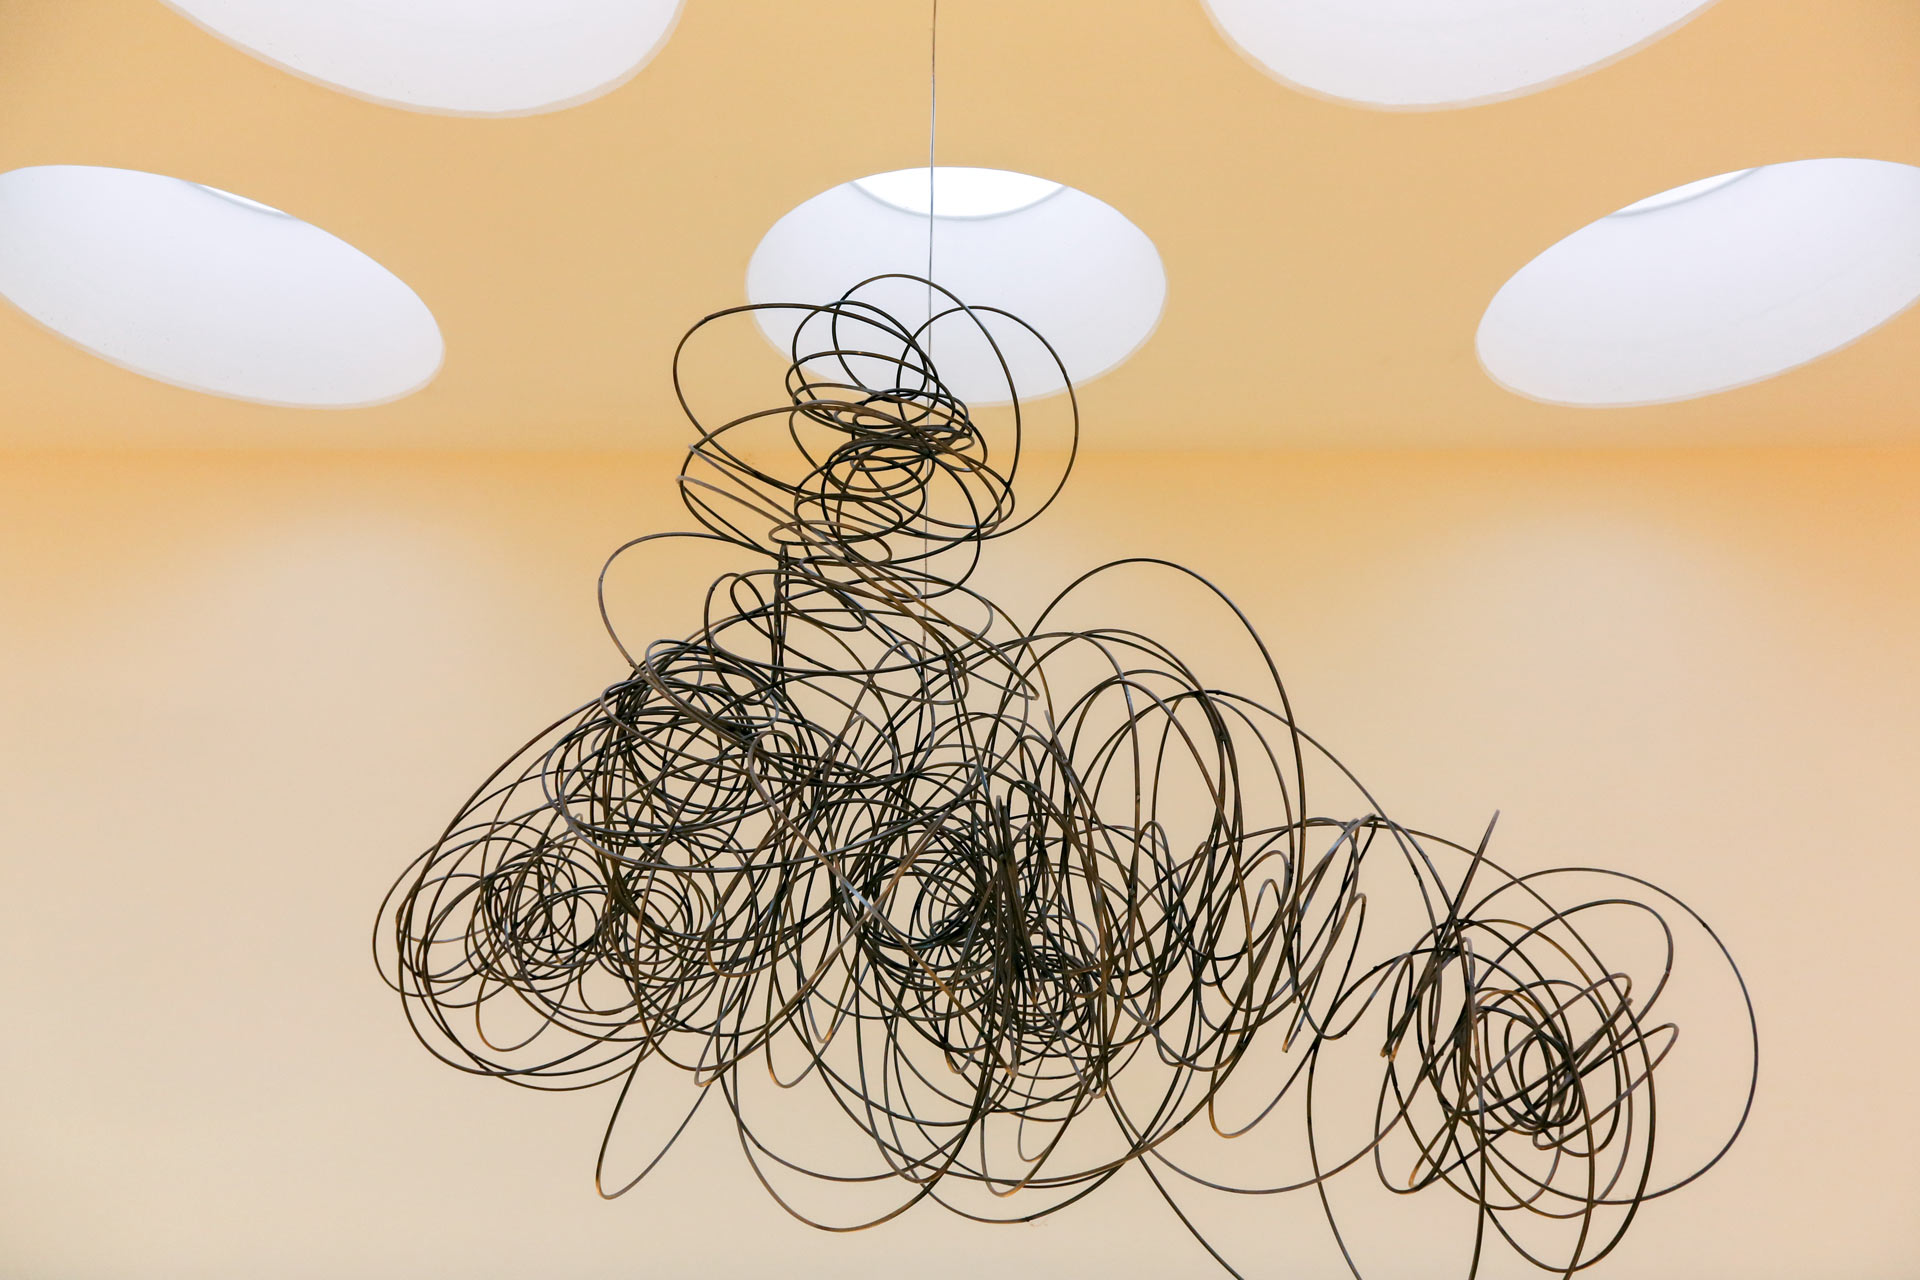 "Every expense spared, except for an Antony Gormley sculptural scribble 'Feeling Material XXXIV', which hangs in building 500 - it is obvious these people have their minds on something higher than decor."